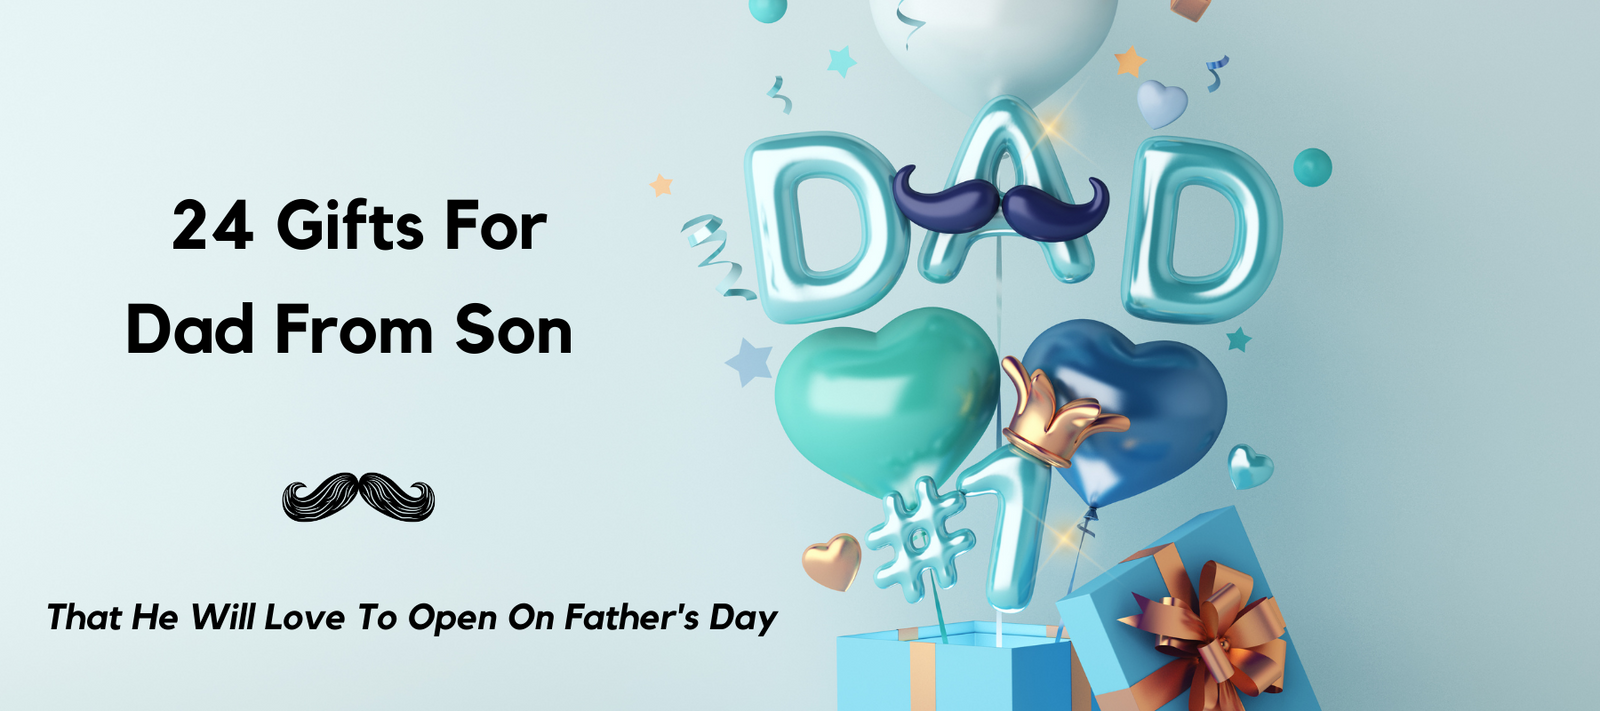 Gifts for Fathers Day, Gifts from Daughter Son Wife for Fathers Day,  Birthday Gifts for Dad, Dad Birthday Gifts, Dad Gifts, Candles Gifts for Dad  Fathers Day, Father's Day Gifts, Daddy Gifts |